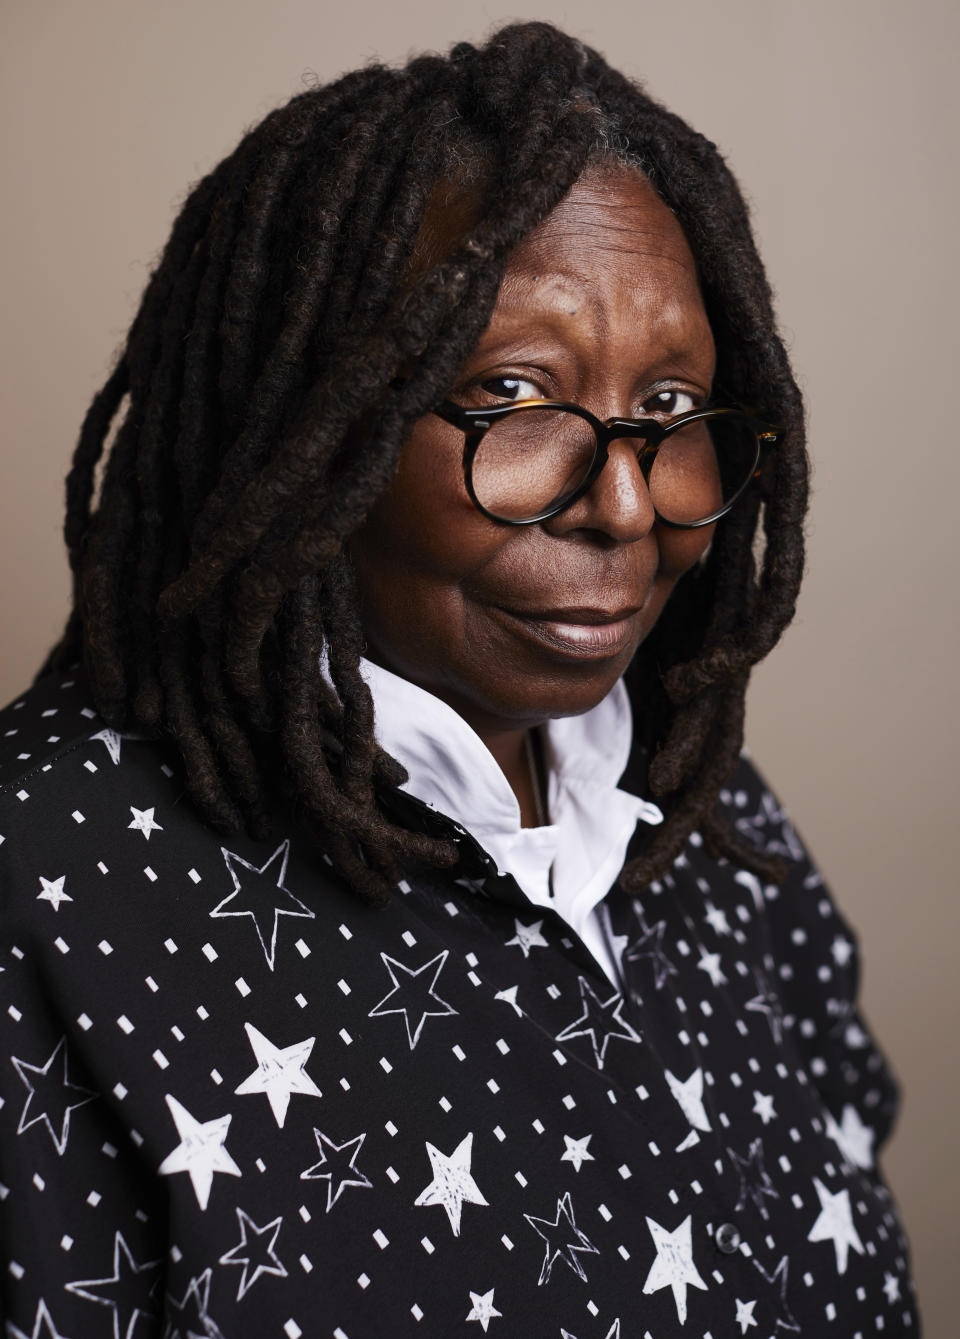 Whoopi Goldberg poses for a portrait to promote the film "Till," on Friday, Sept. 30, 2022, at the Park Lane Hotel in New York. (Photo by Matt Licari/Invision/AP)